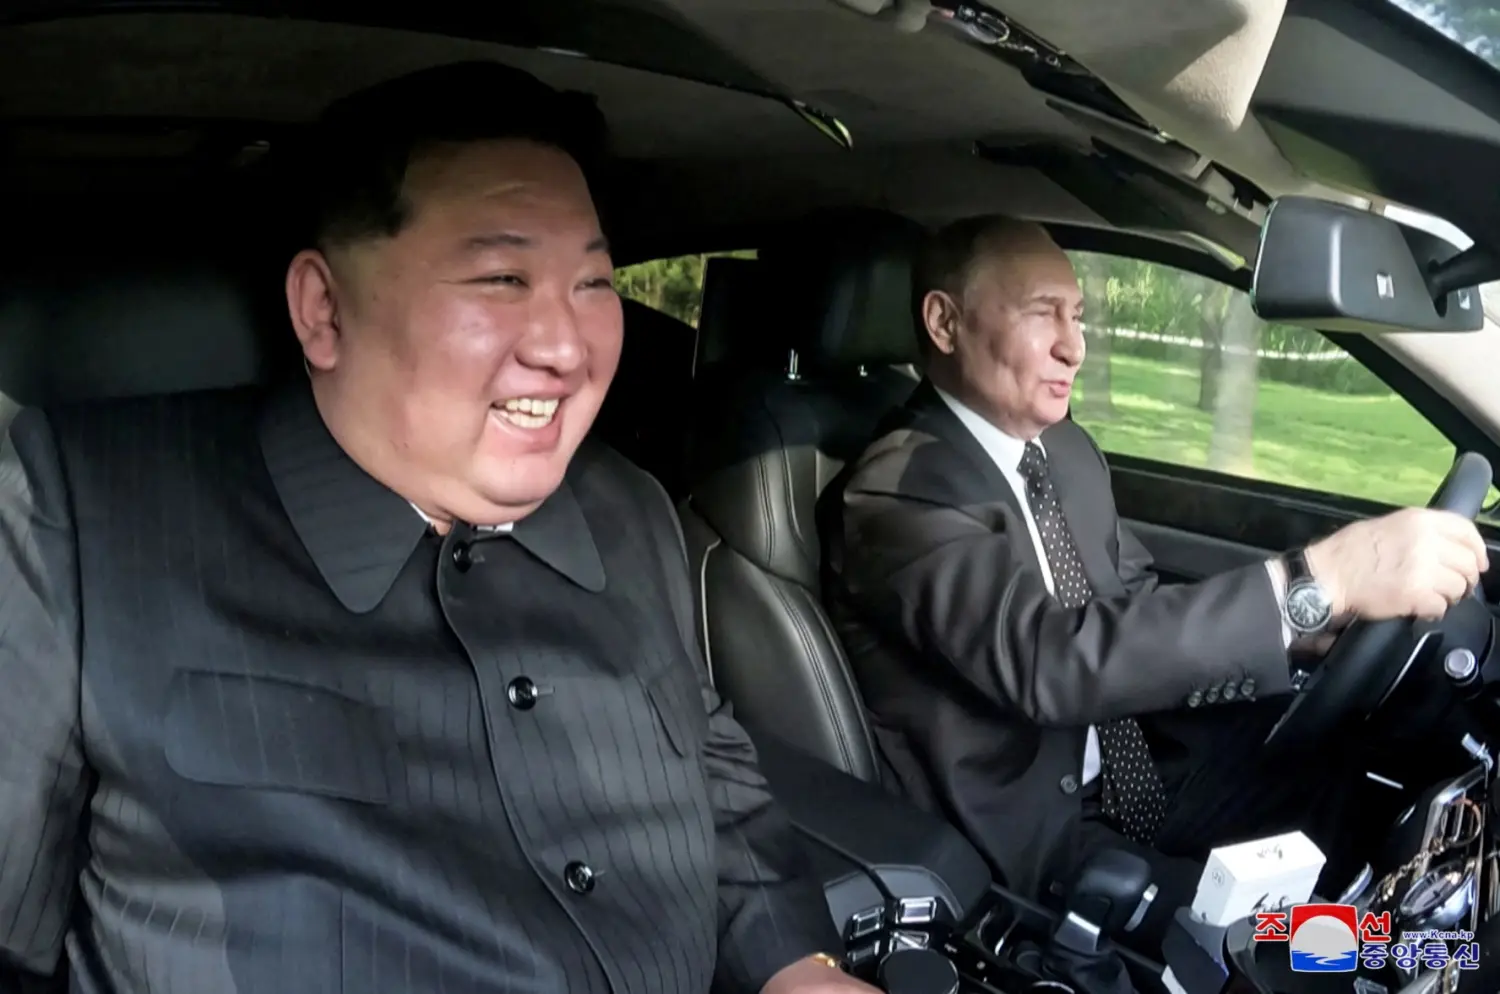 Russia's President Vladimir Putin and North Korea's leader Kim Jong Un ride an Aurus car in Pyongyang, North Korea in this image released by the Korean Central News Agency June 20, 2024.